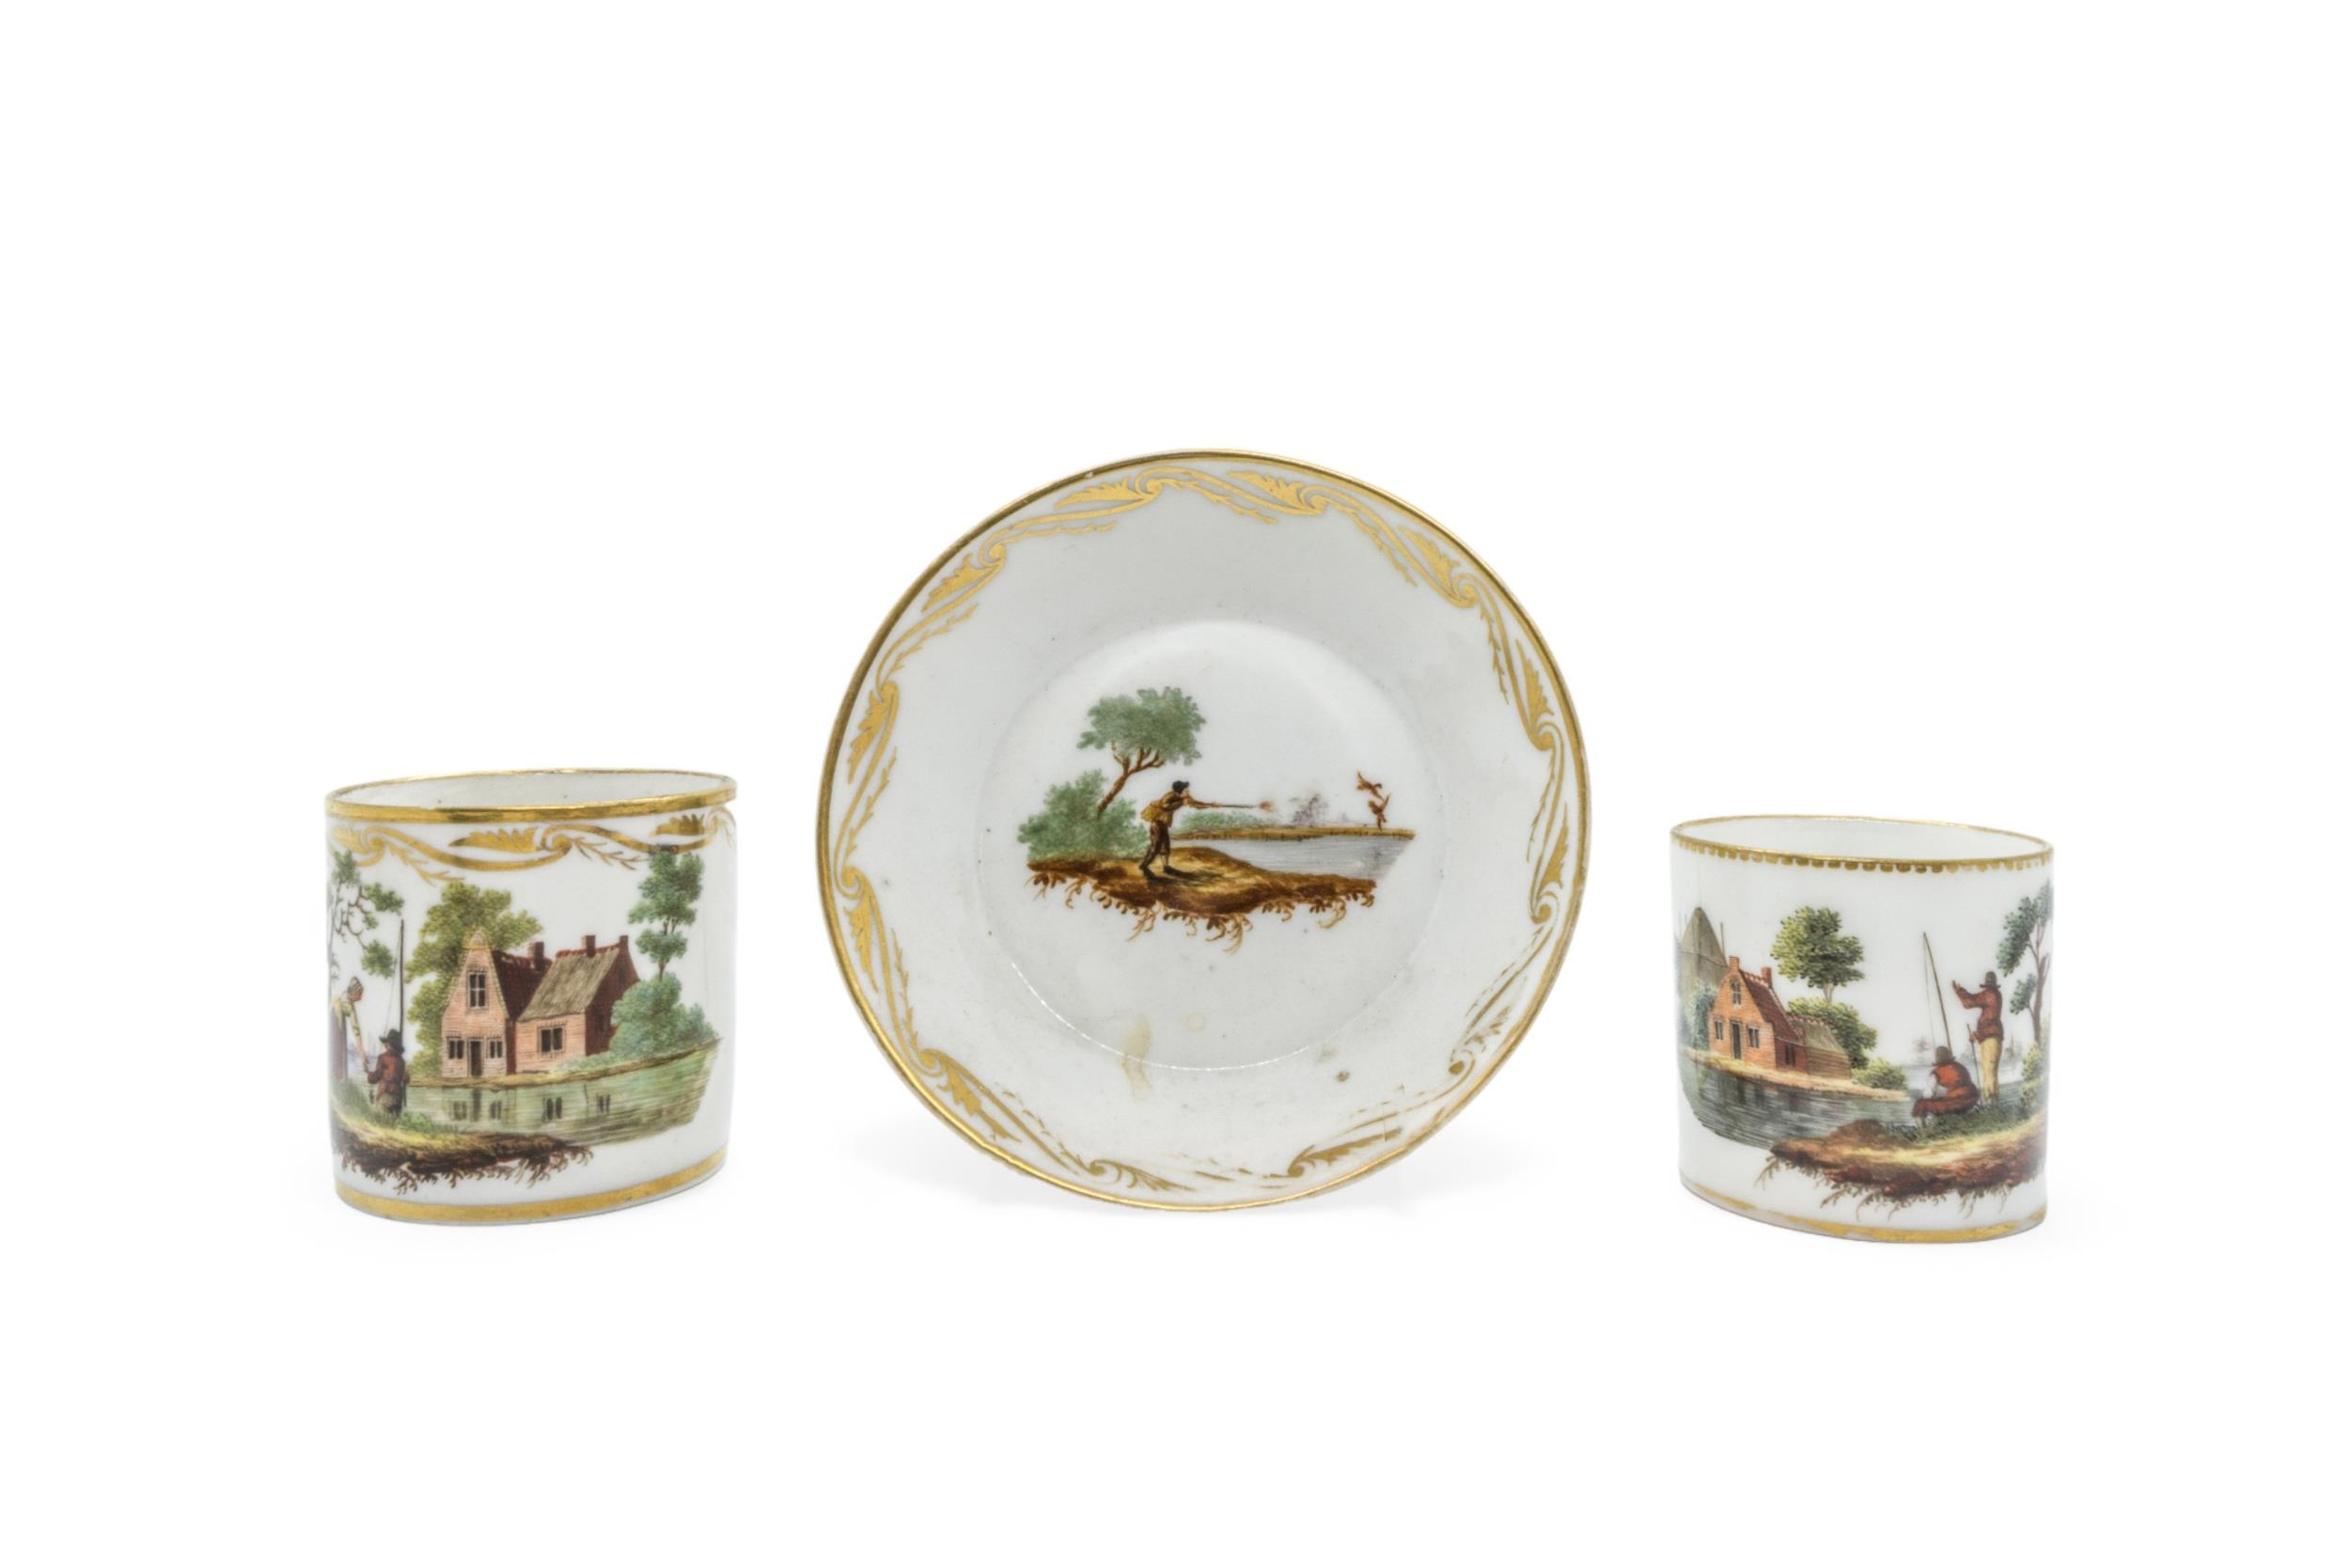 AN AMSTEL PORCELAIN COFFEE CAN AND SAUCER Late 18th/ 19th century, together with a single coffee